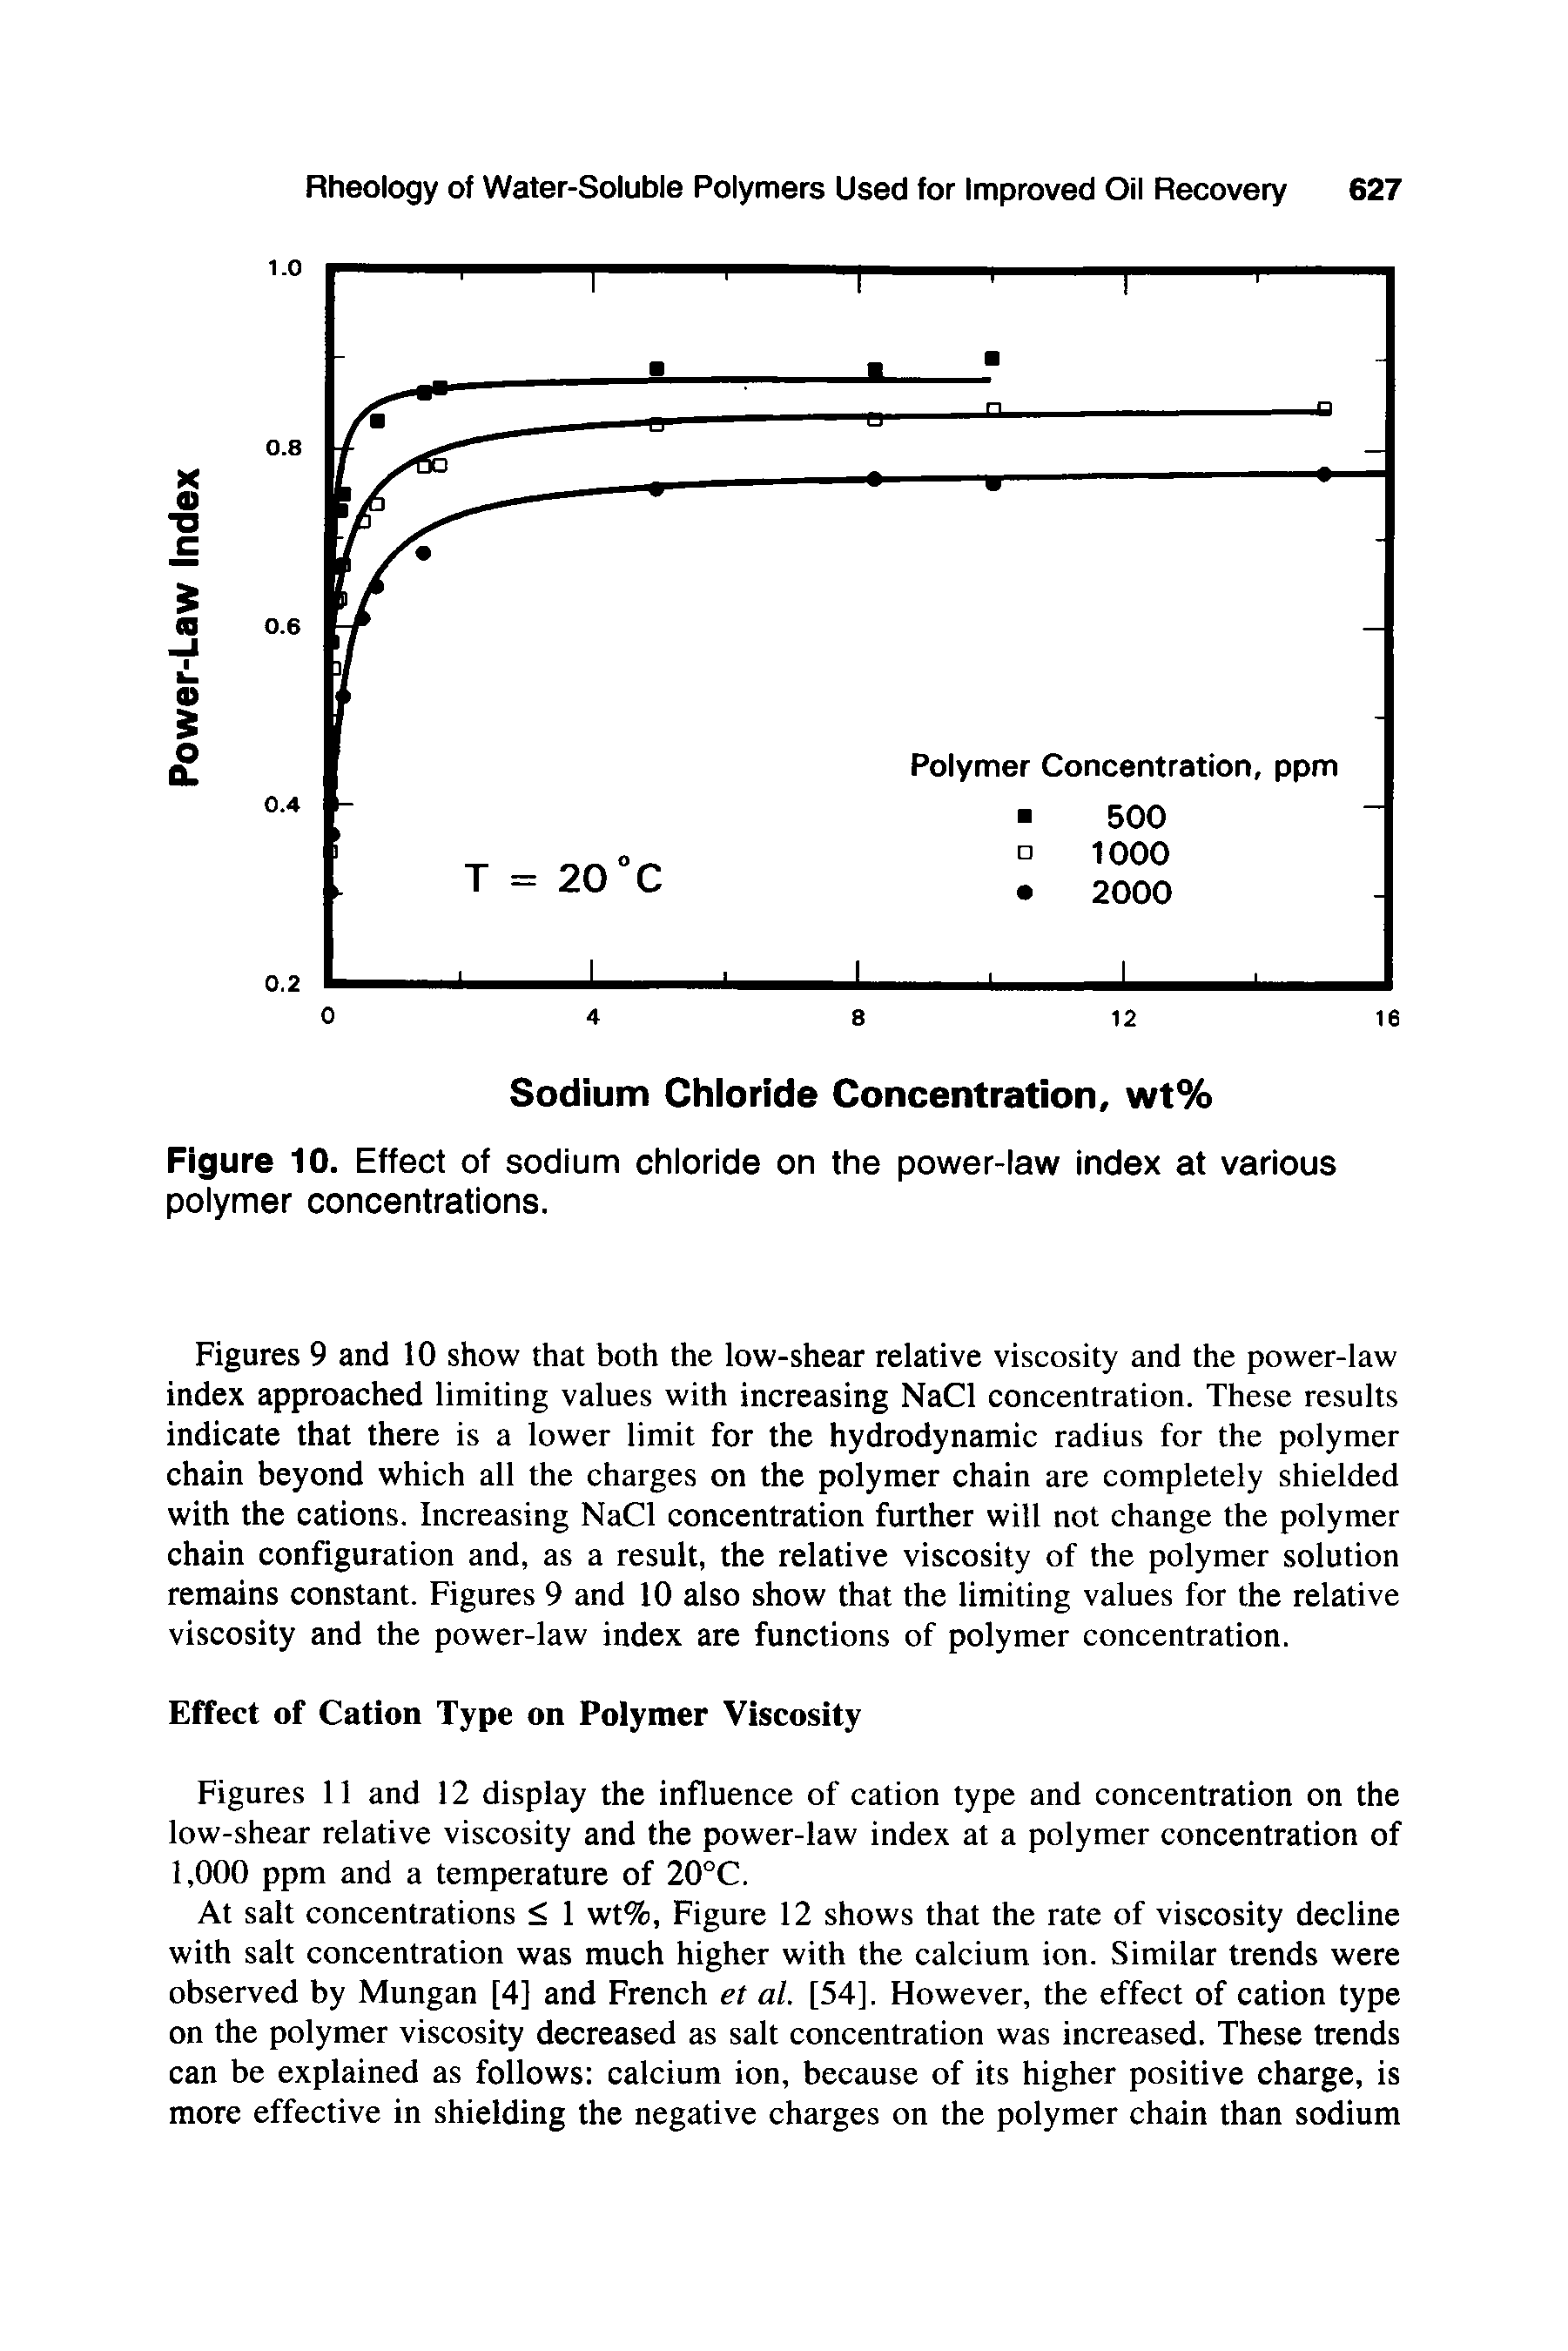 Figures 9 and 10 show that both the low-shear relative viscosity and the power-law index approached limiting values with increasing NaCl concentration. These results indicate that there is a lower limit for the hydrodynamic radius for the polymer chain beyond which all the charges on the polymer chain are completely shielded with the cations. Increasing NaCl concentration further will not change the polymer chain configuration and, as a result, the relative viscosity of the polymer solution remains constant. Figures 9 and 10 also show that the limiting values for the relative viscosity and the power-law index are functions of polymer concentration.